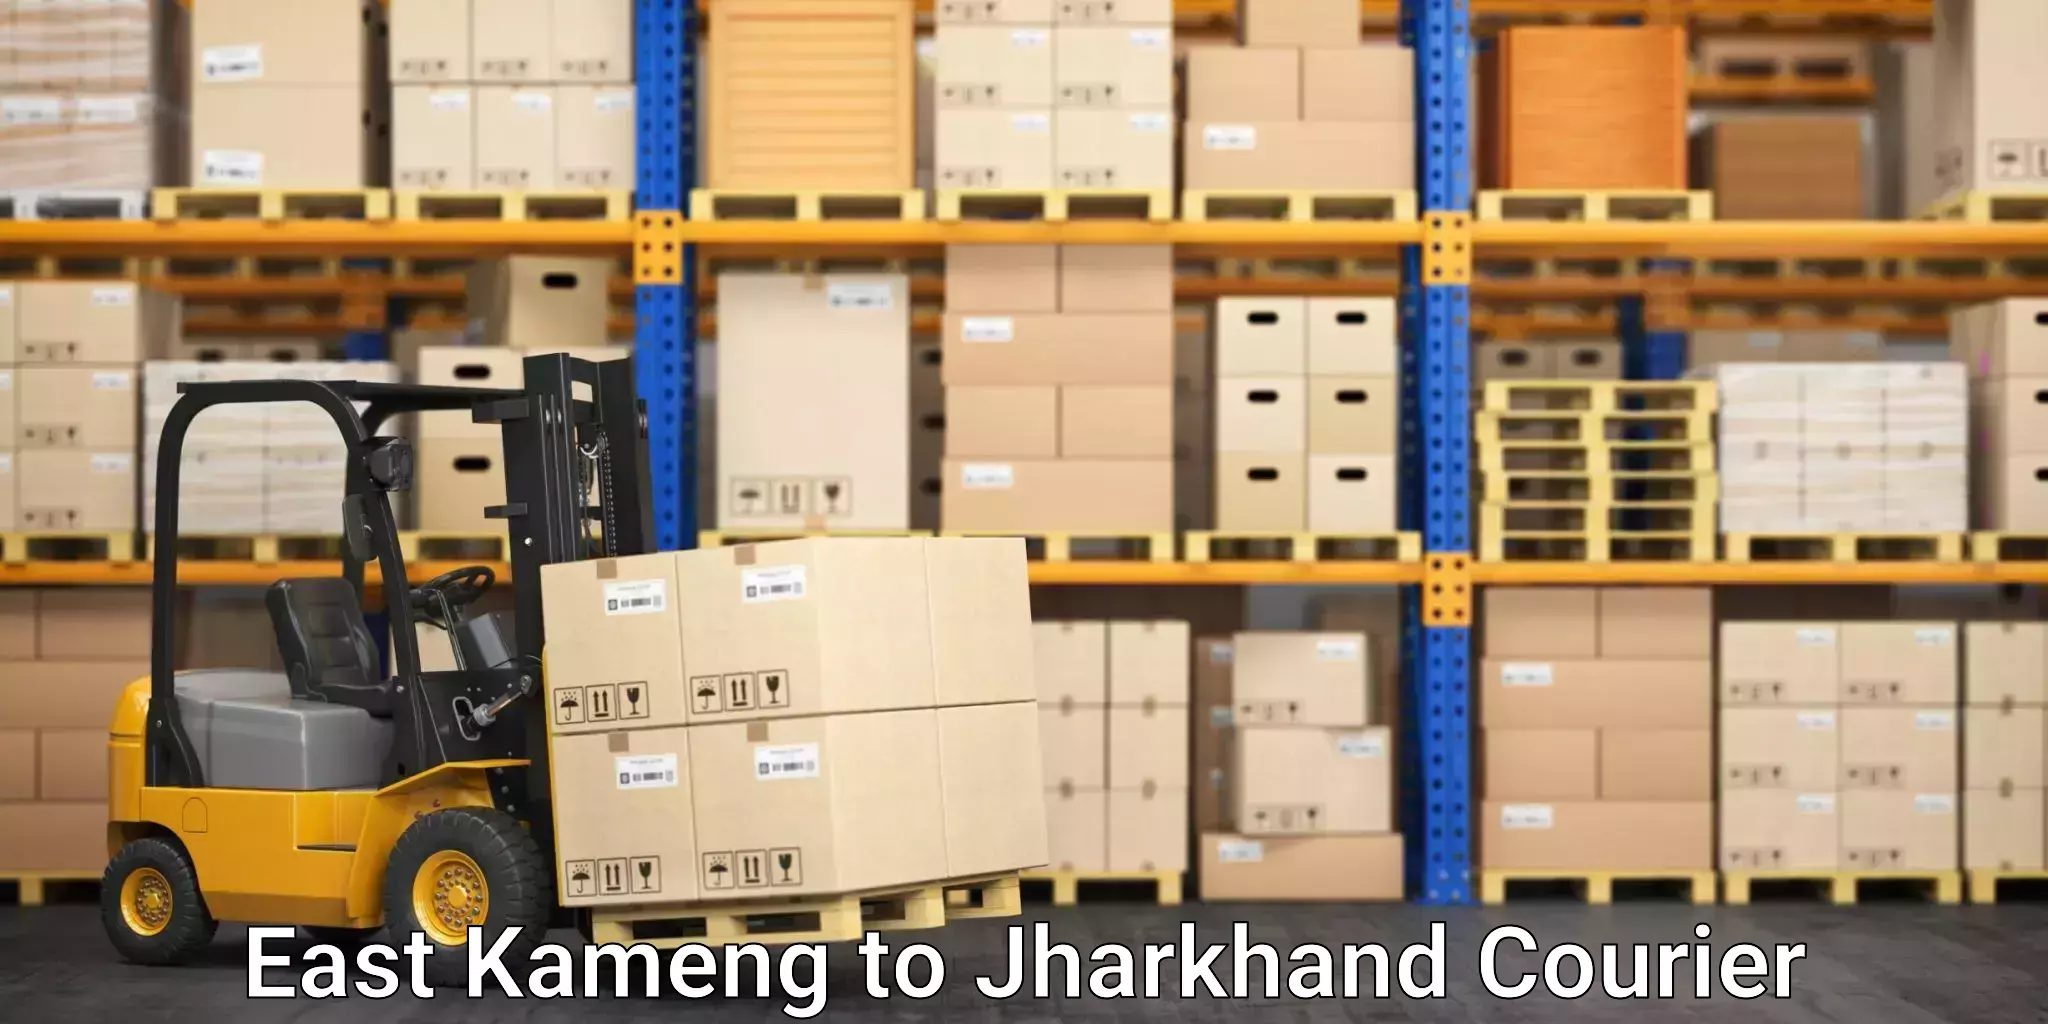 Streamlined shipping process in East Kameng to Jamshedpur